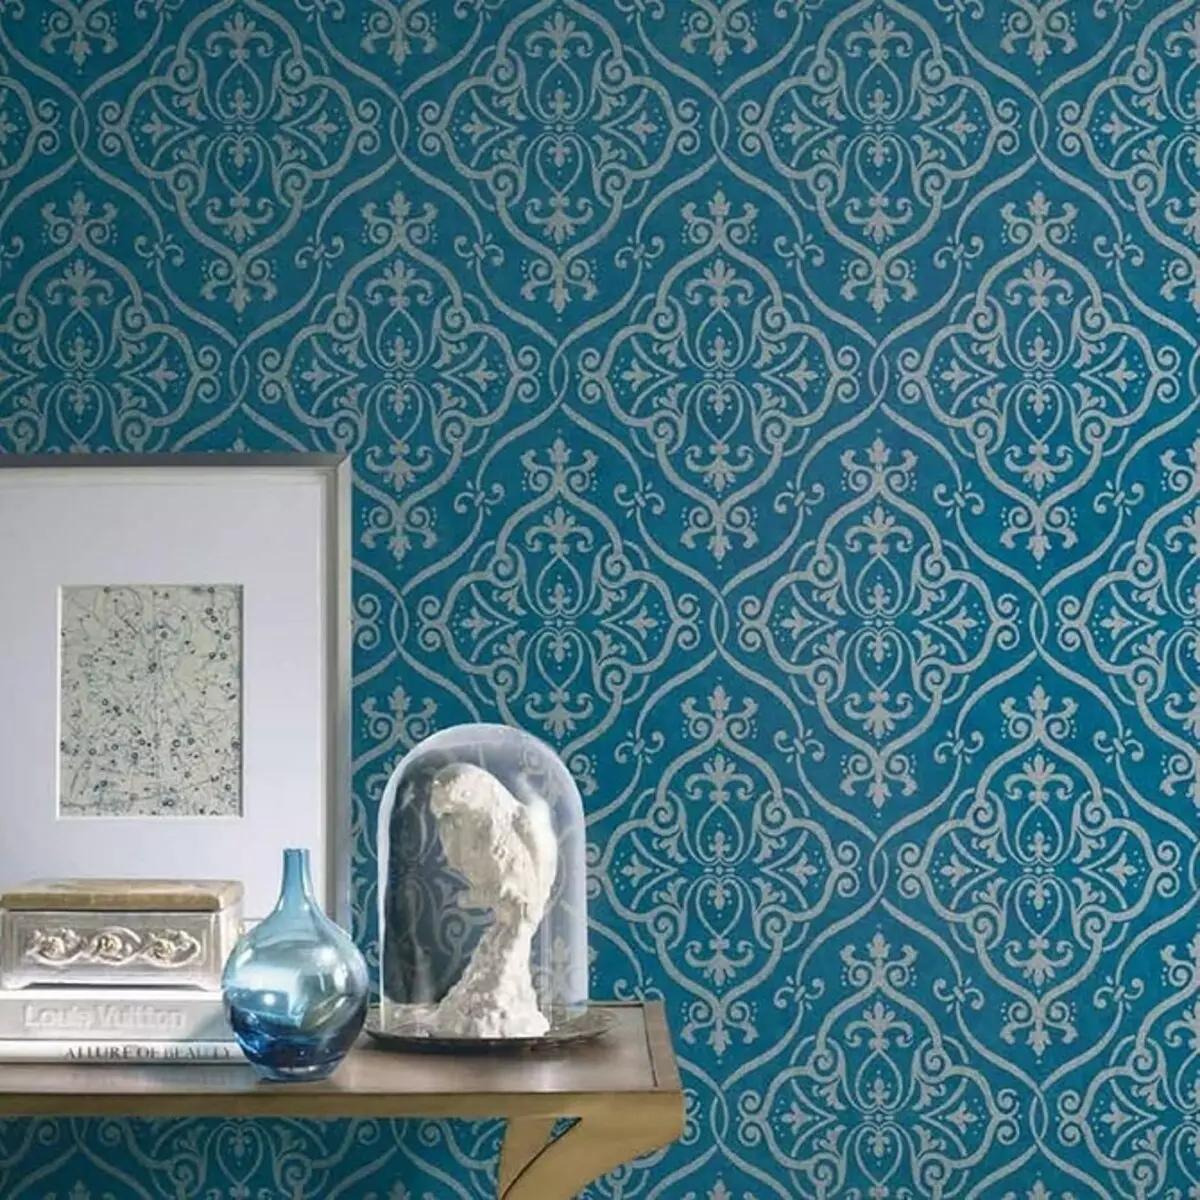 Damascus, Paisley and 8 more names of interior patterns that will be useful to you 9758_6